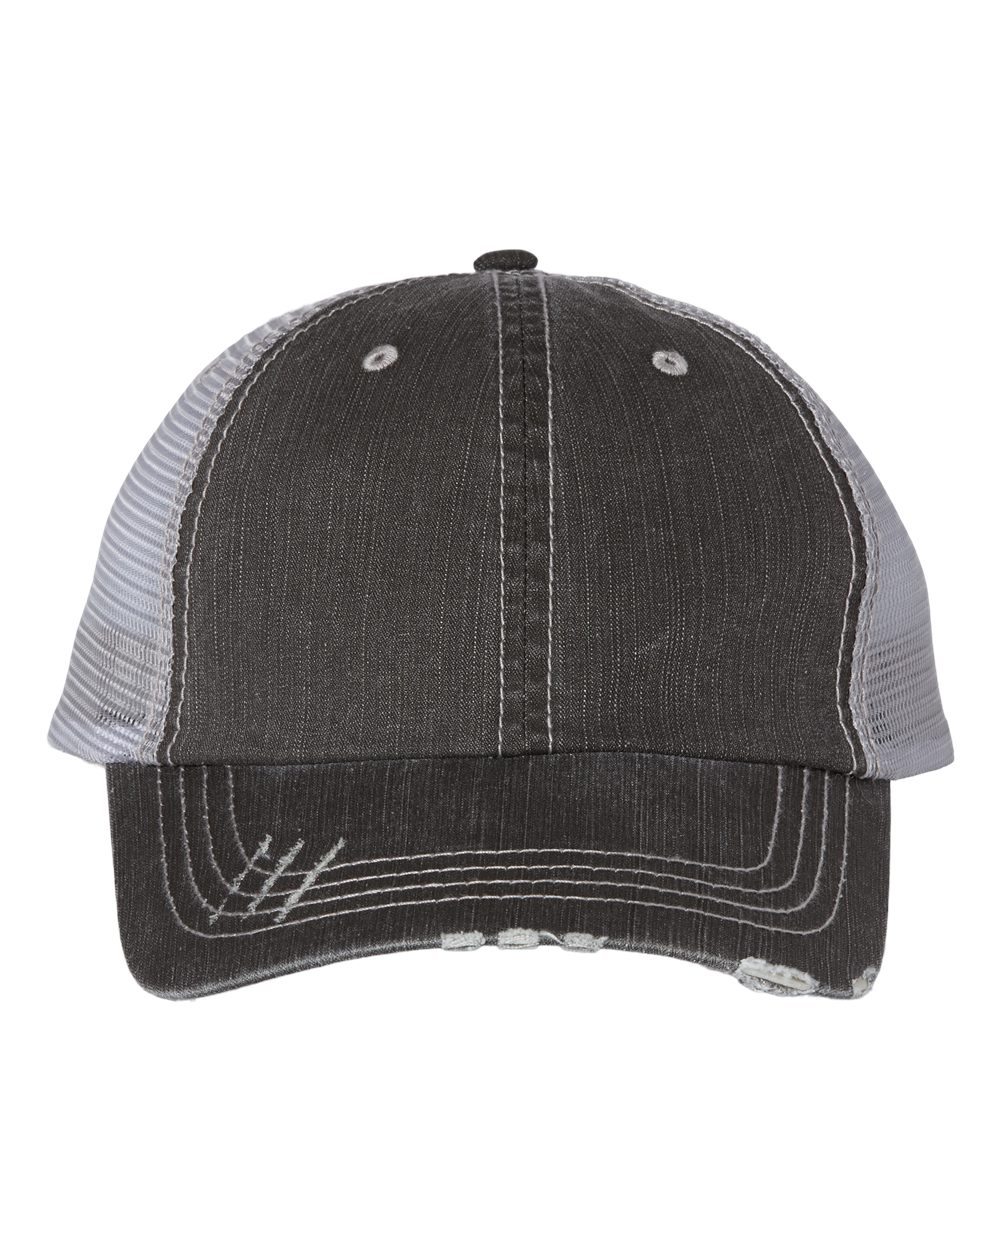 Blessed Teacher Distressed Patch Hat